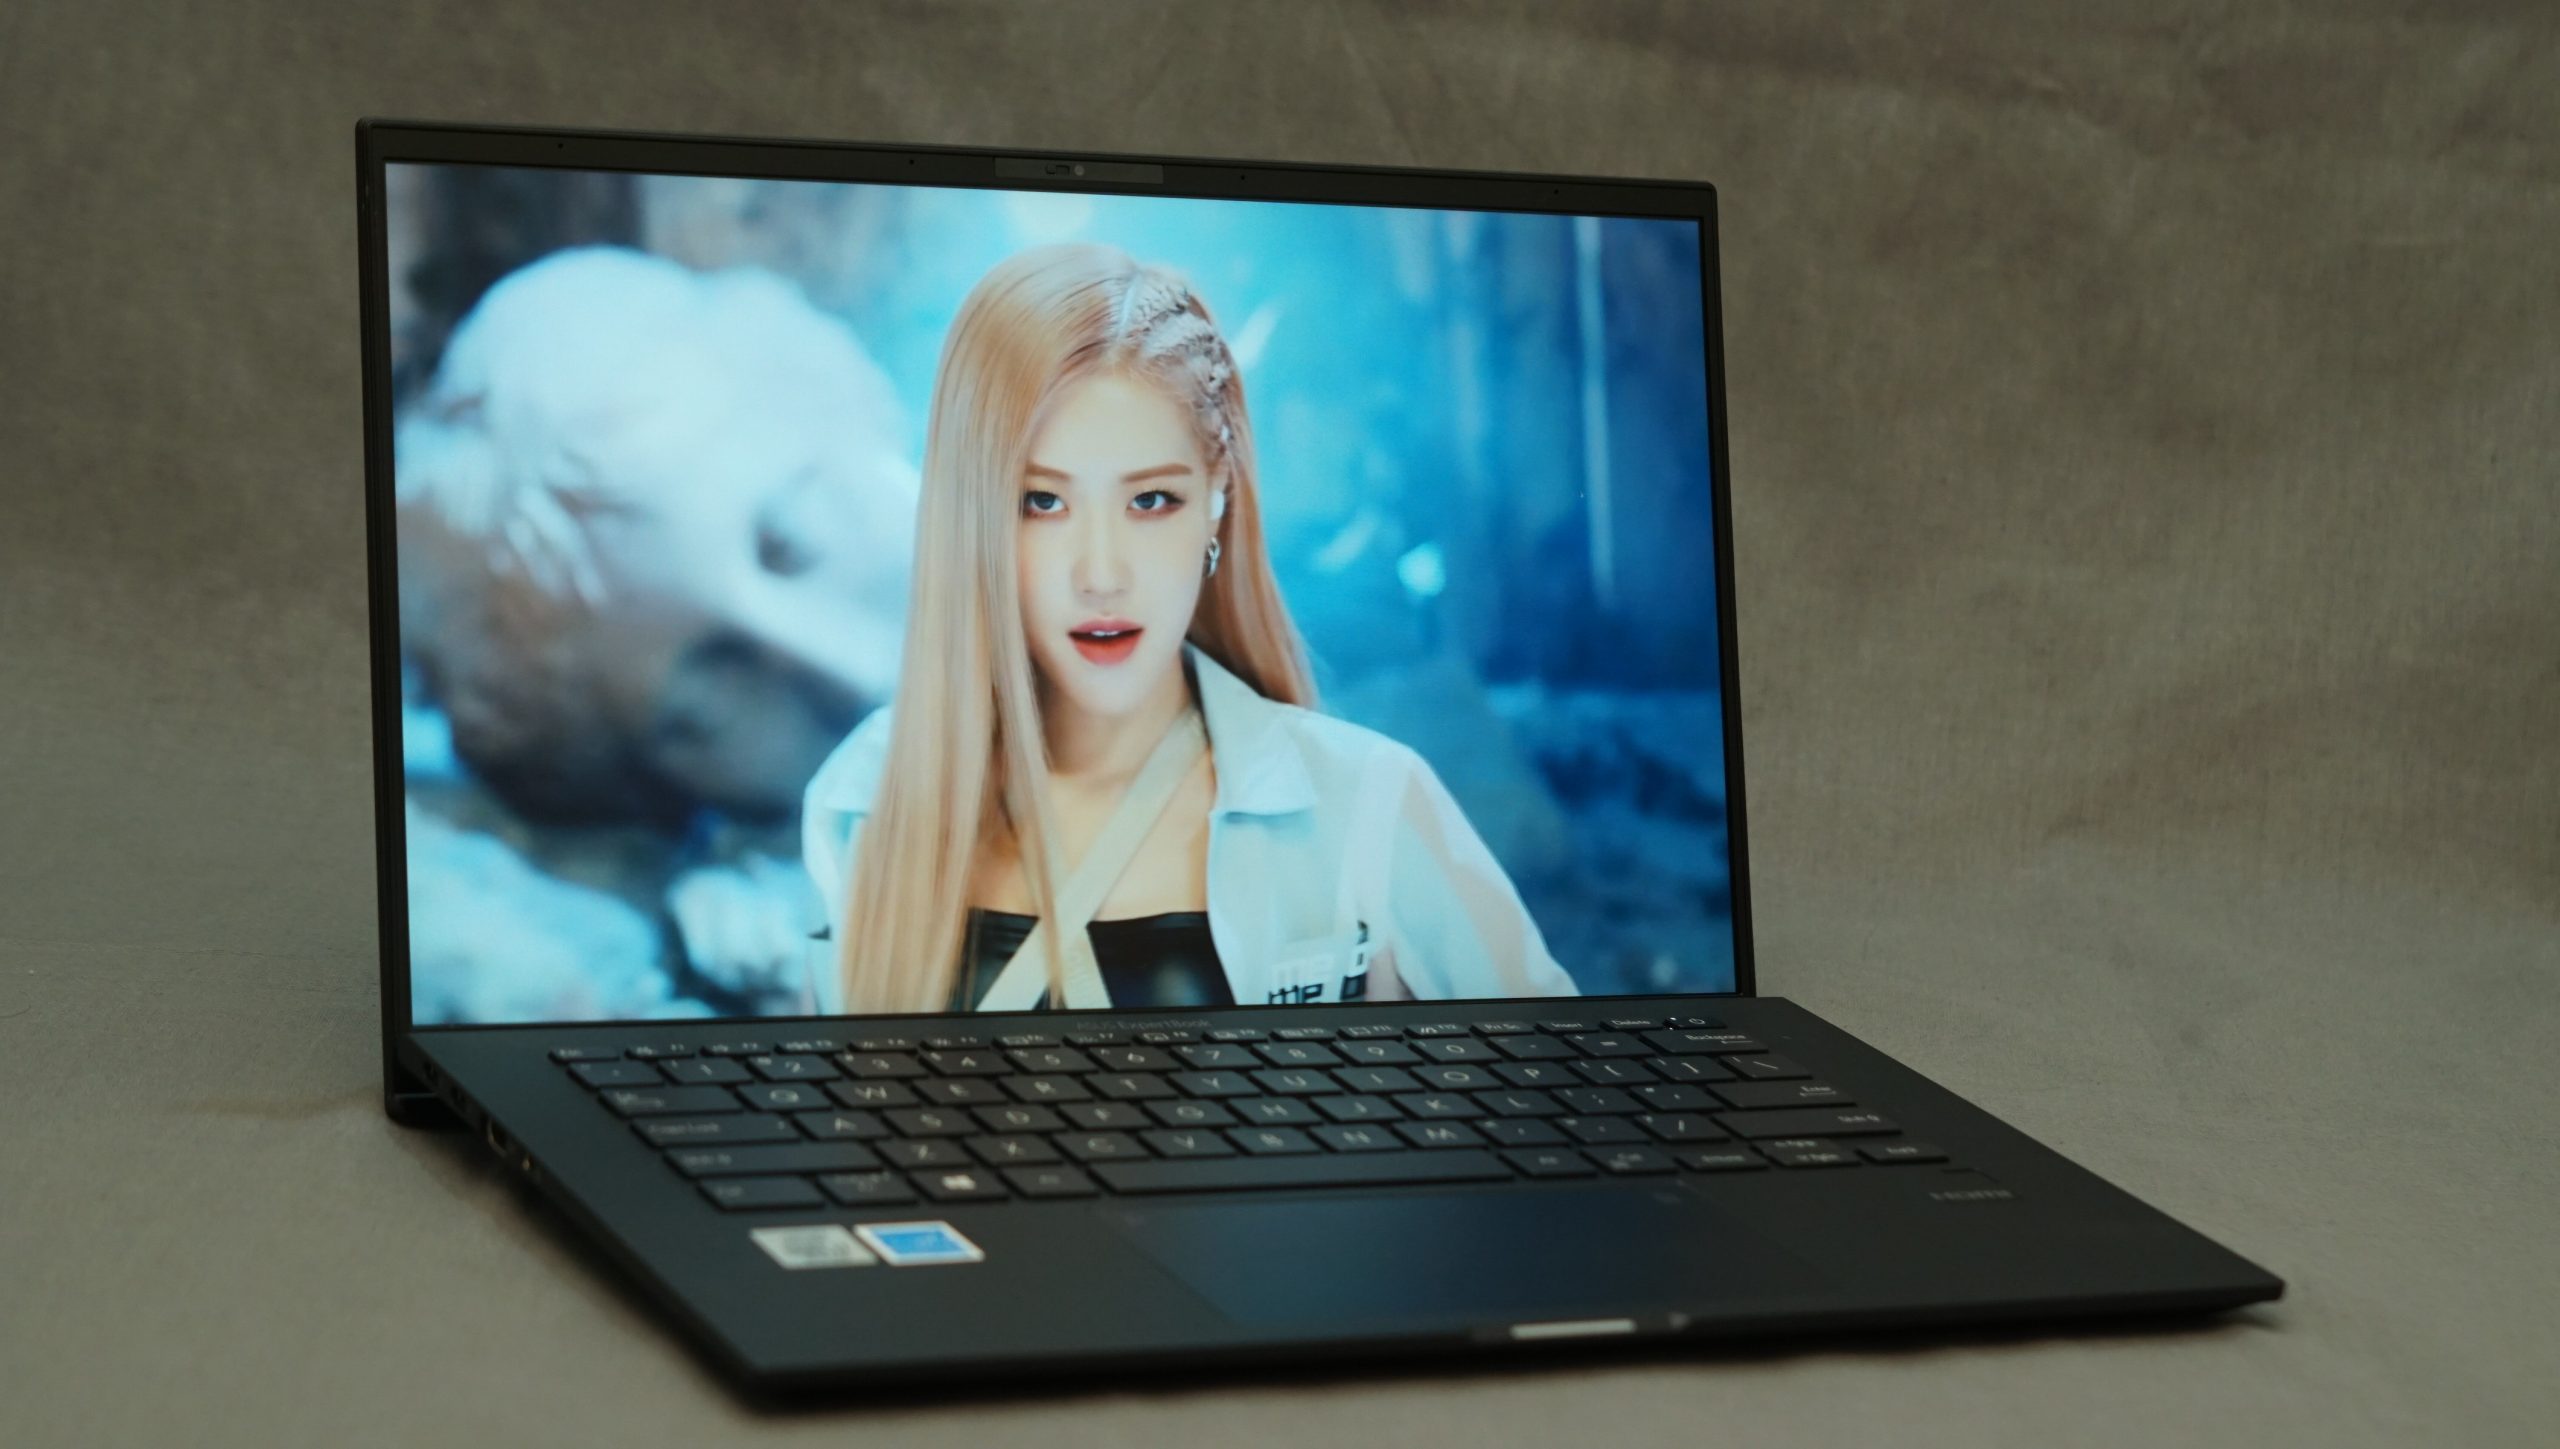 Kpop music video being played on the ASUS Expertbook B9450F